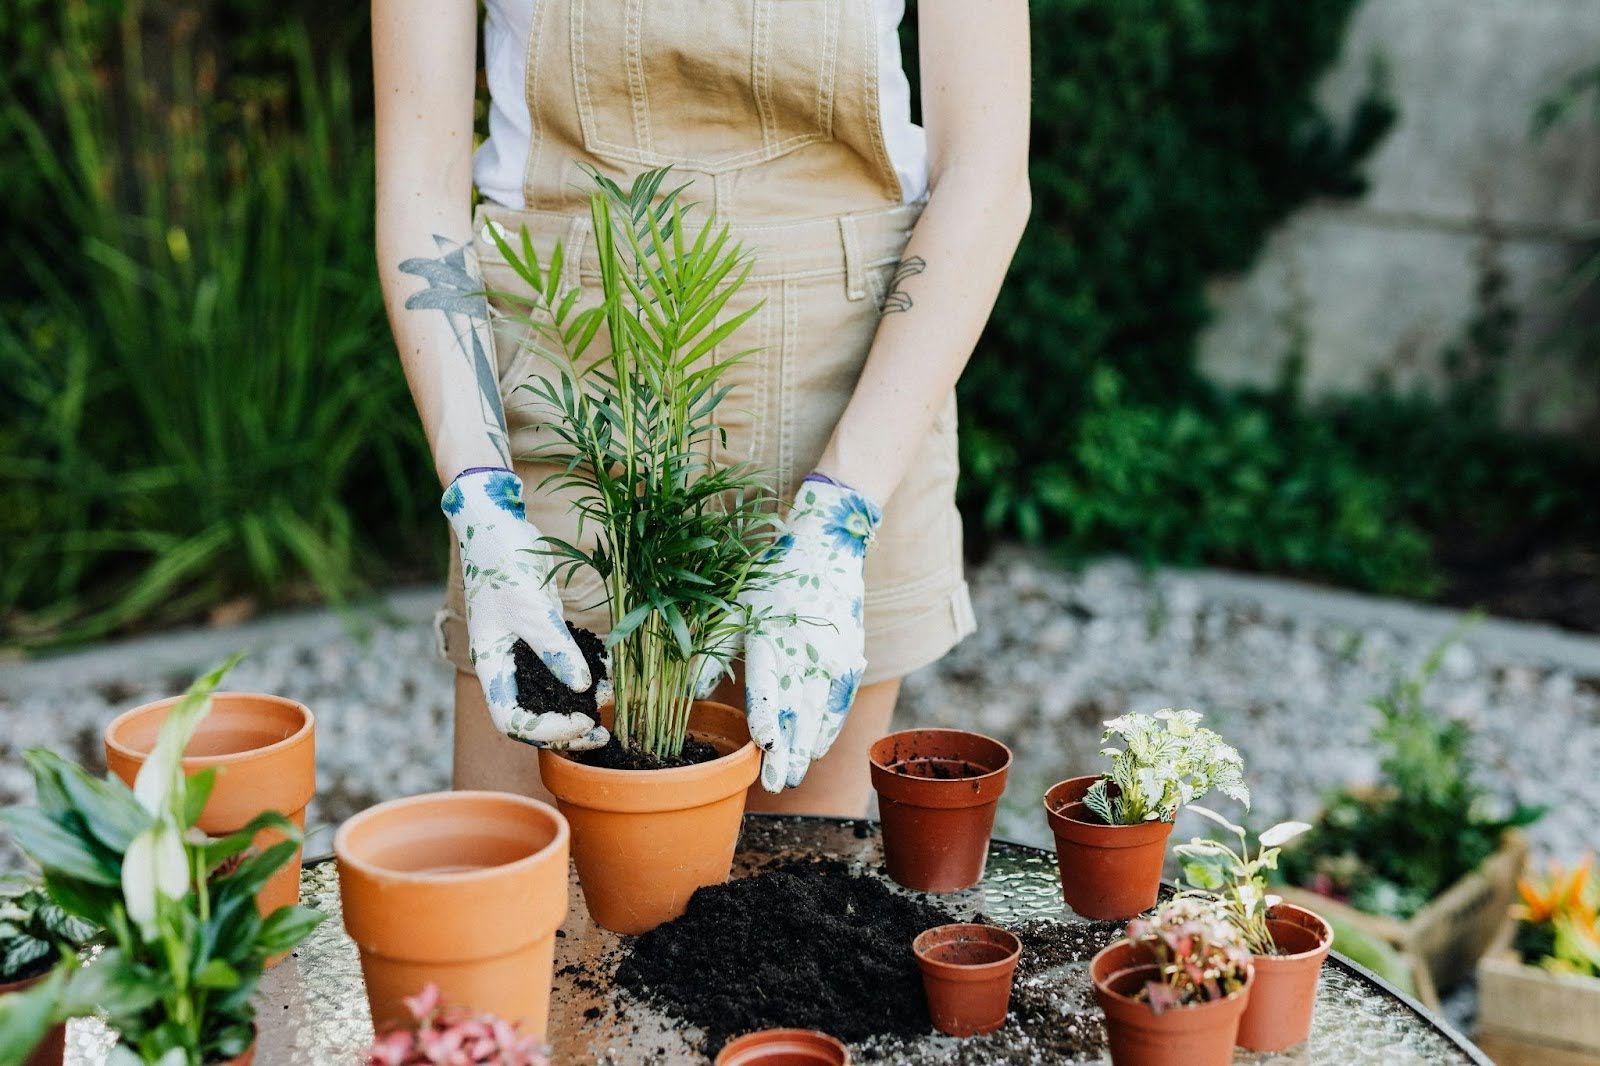 A woman is planting a plant in a pot.